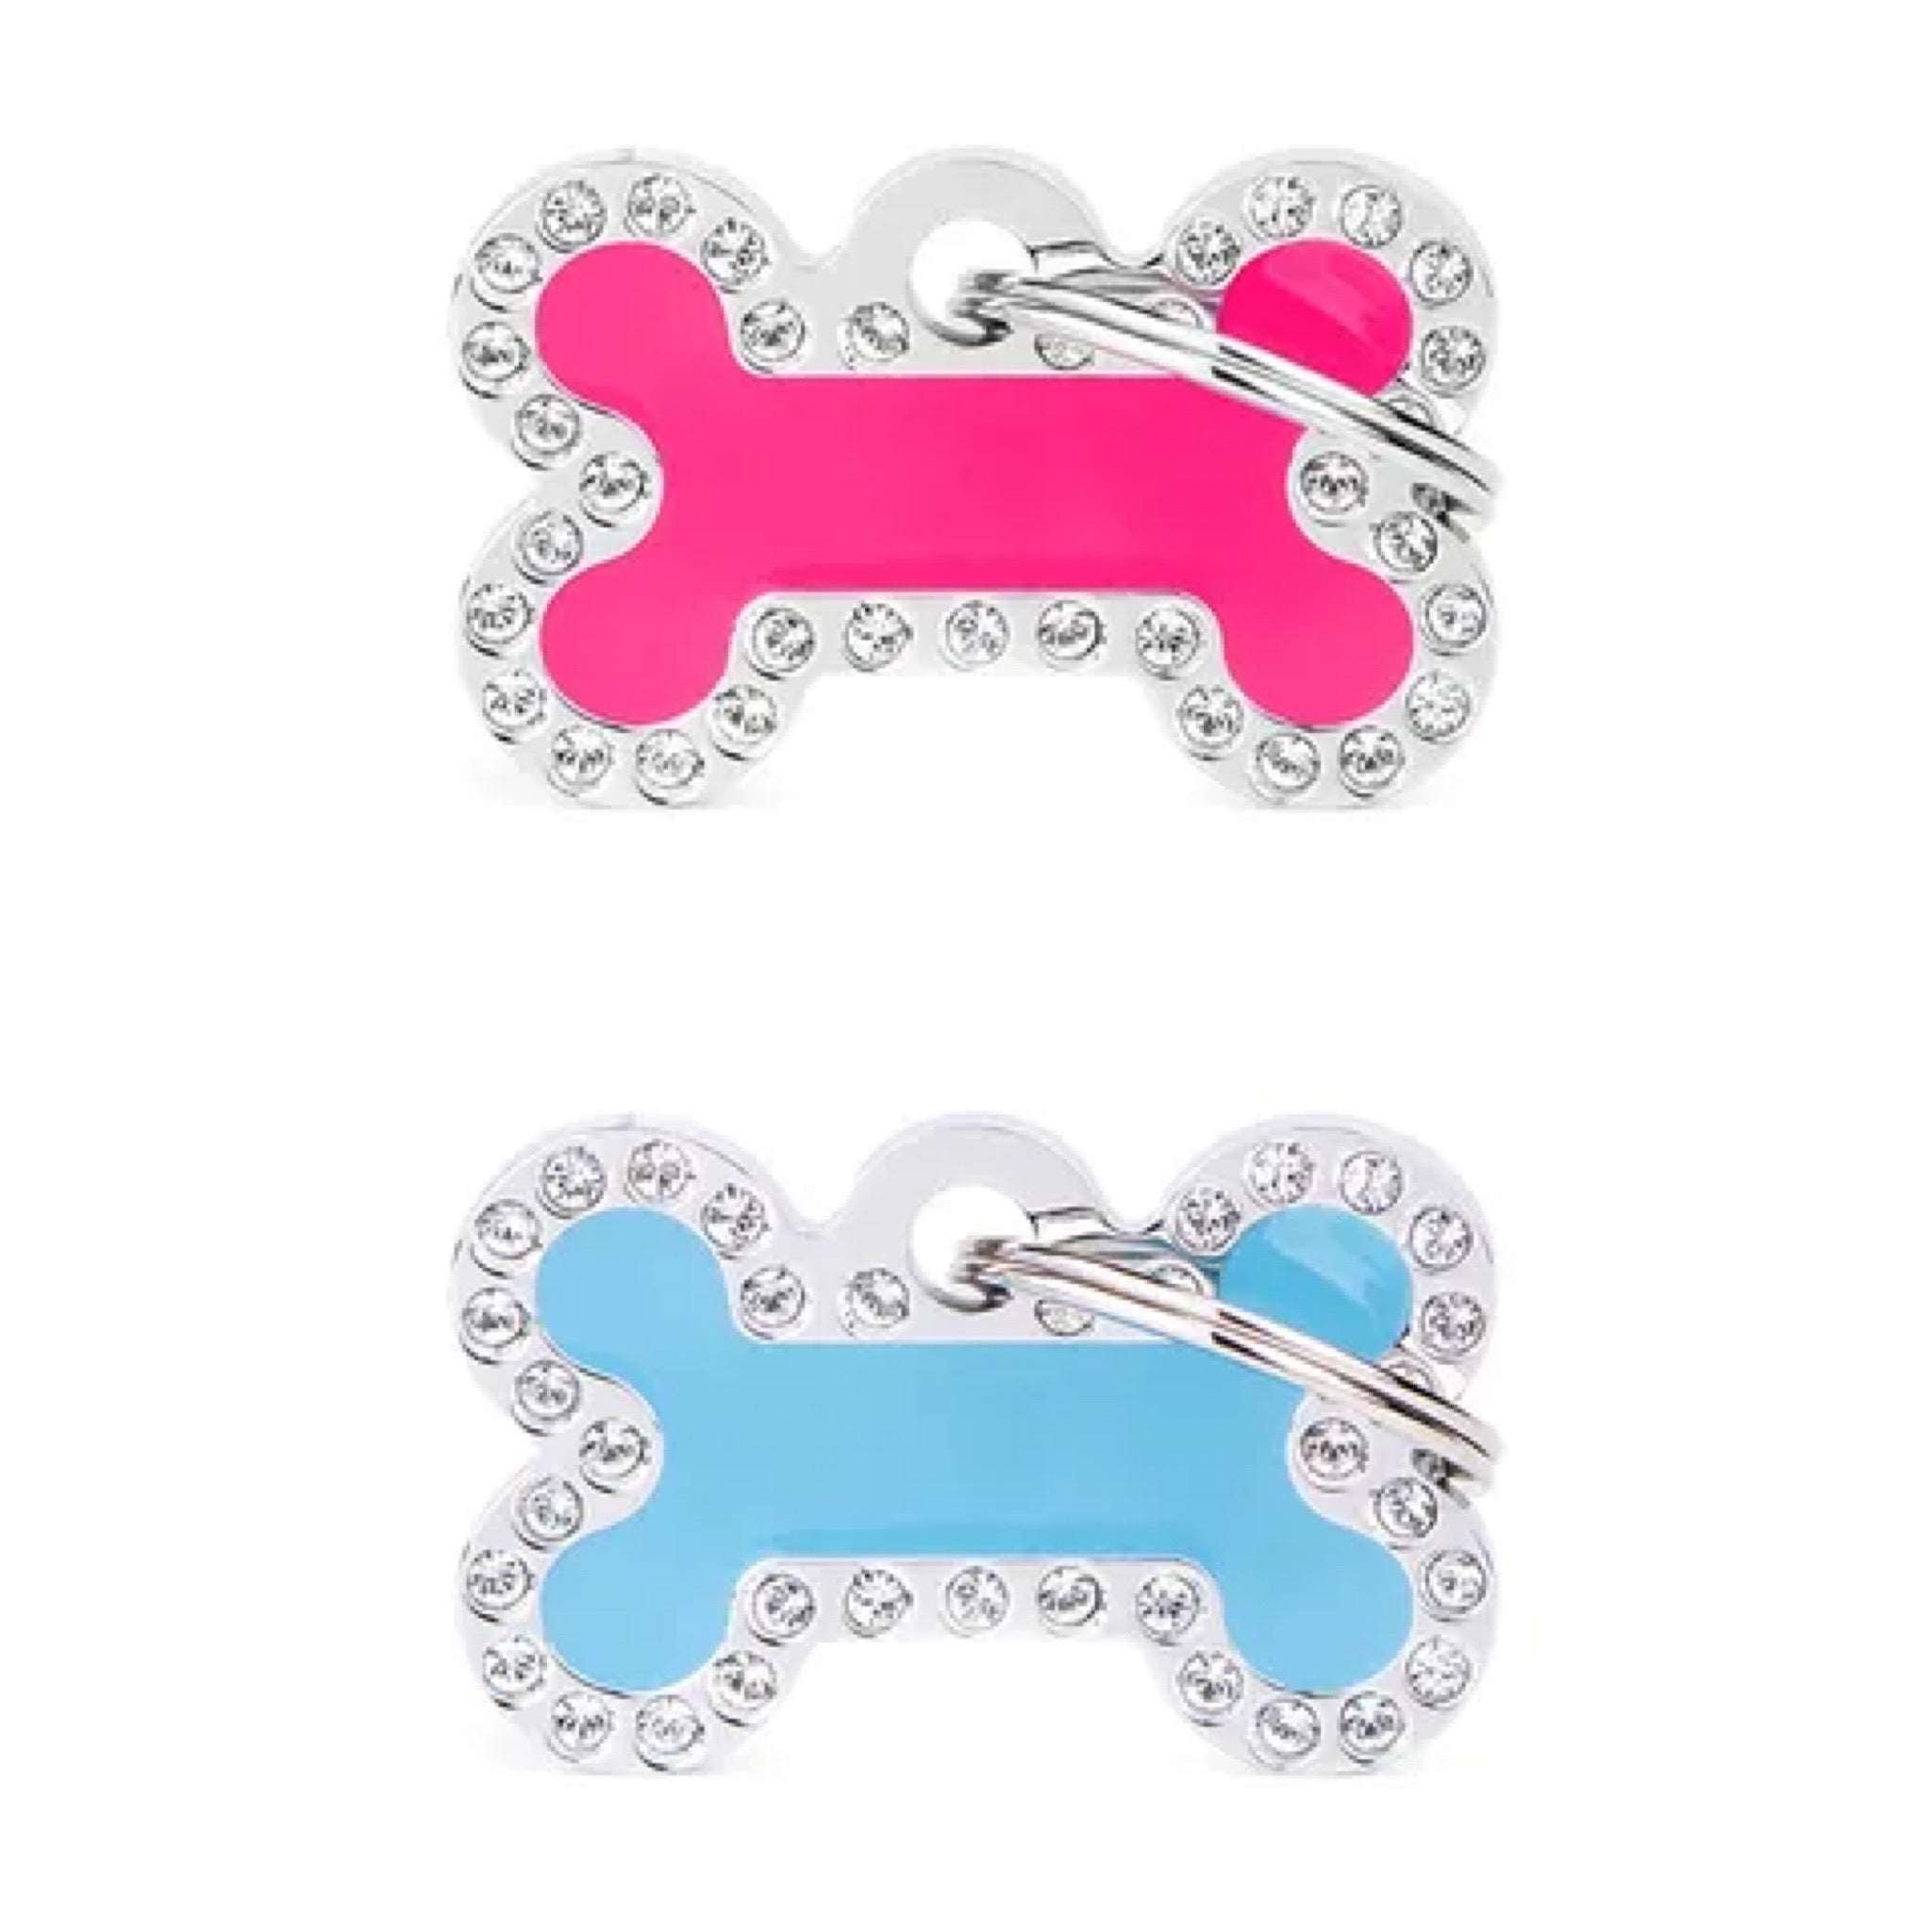 My Family Pet ID Tag Glam - The Dog Shop Warners Bay